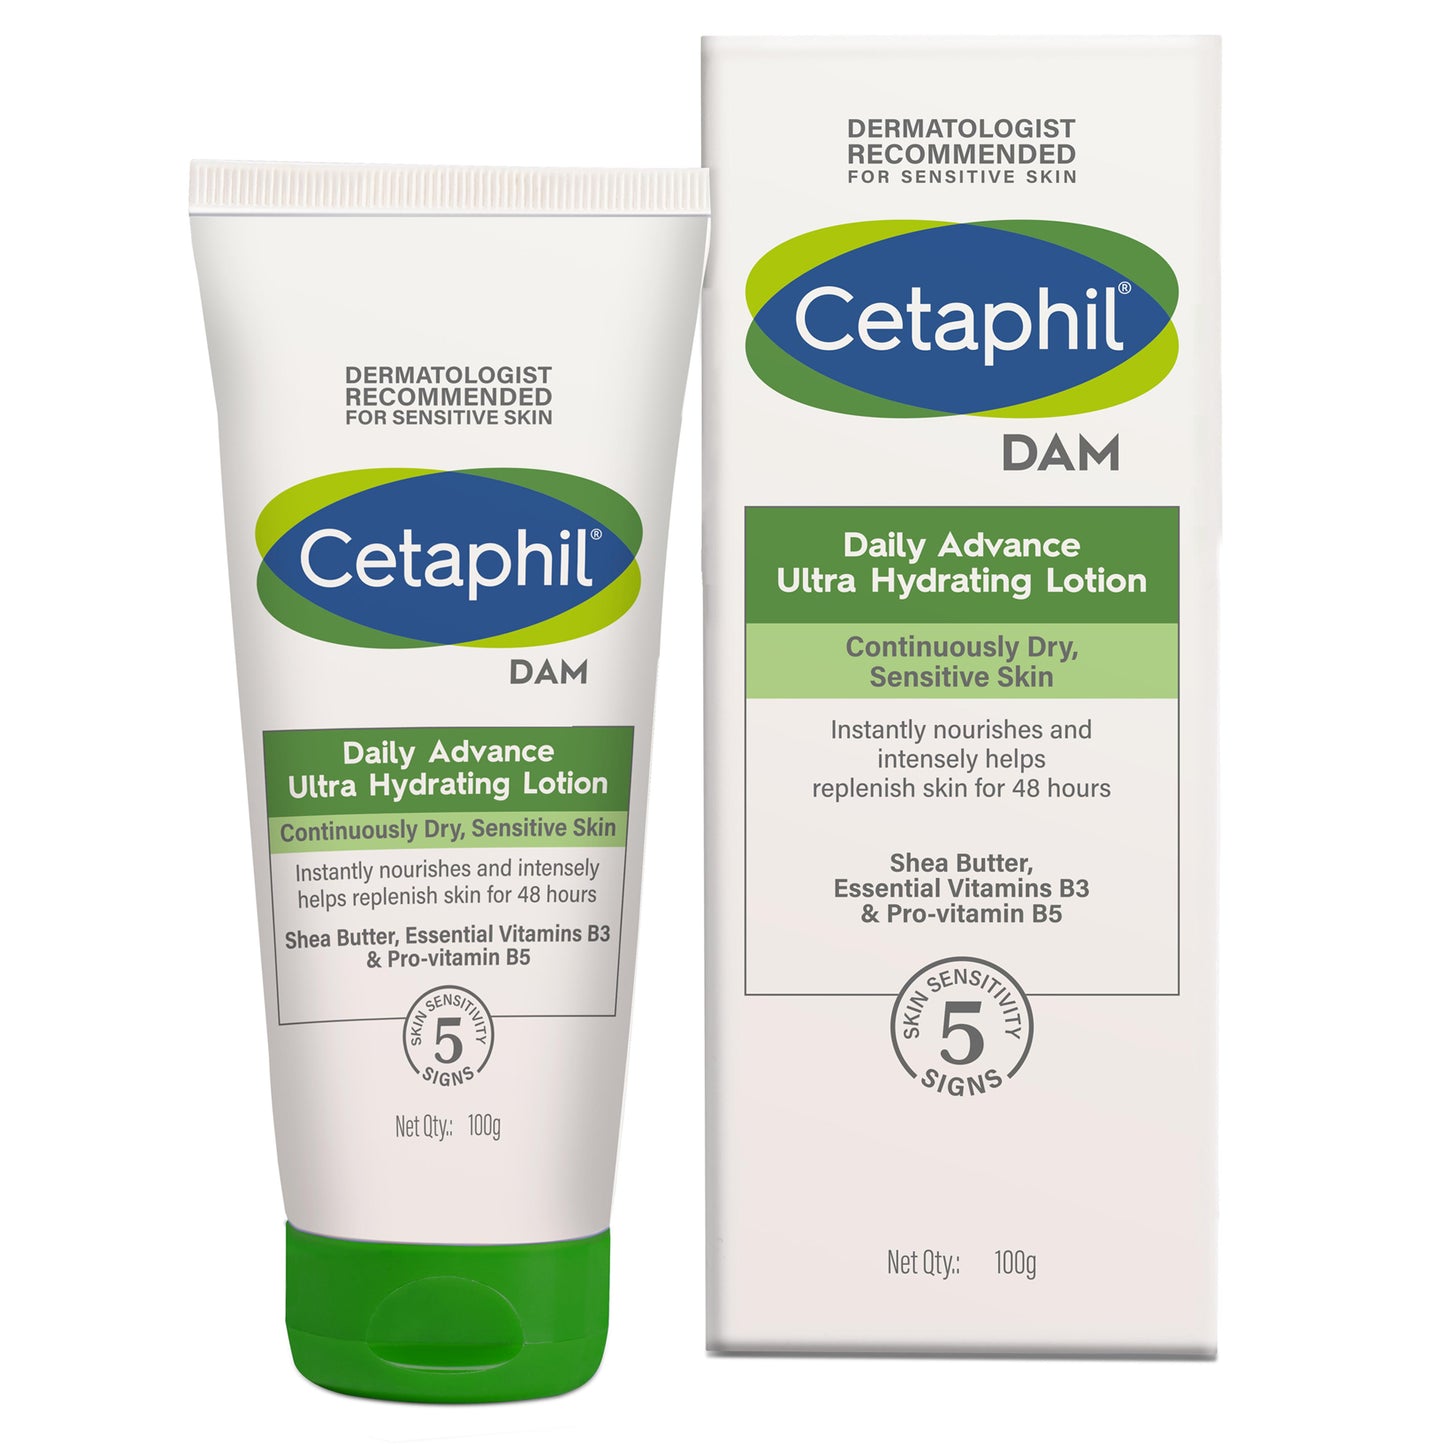 Cetaphil DAM - Daily Advance Ultra Hydrating Lotion, 100gm